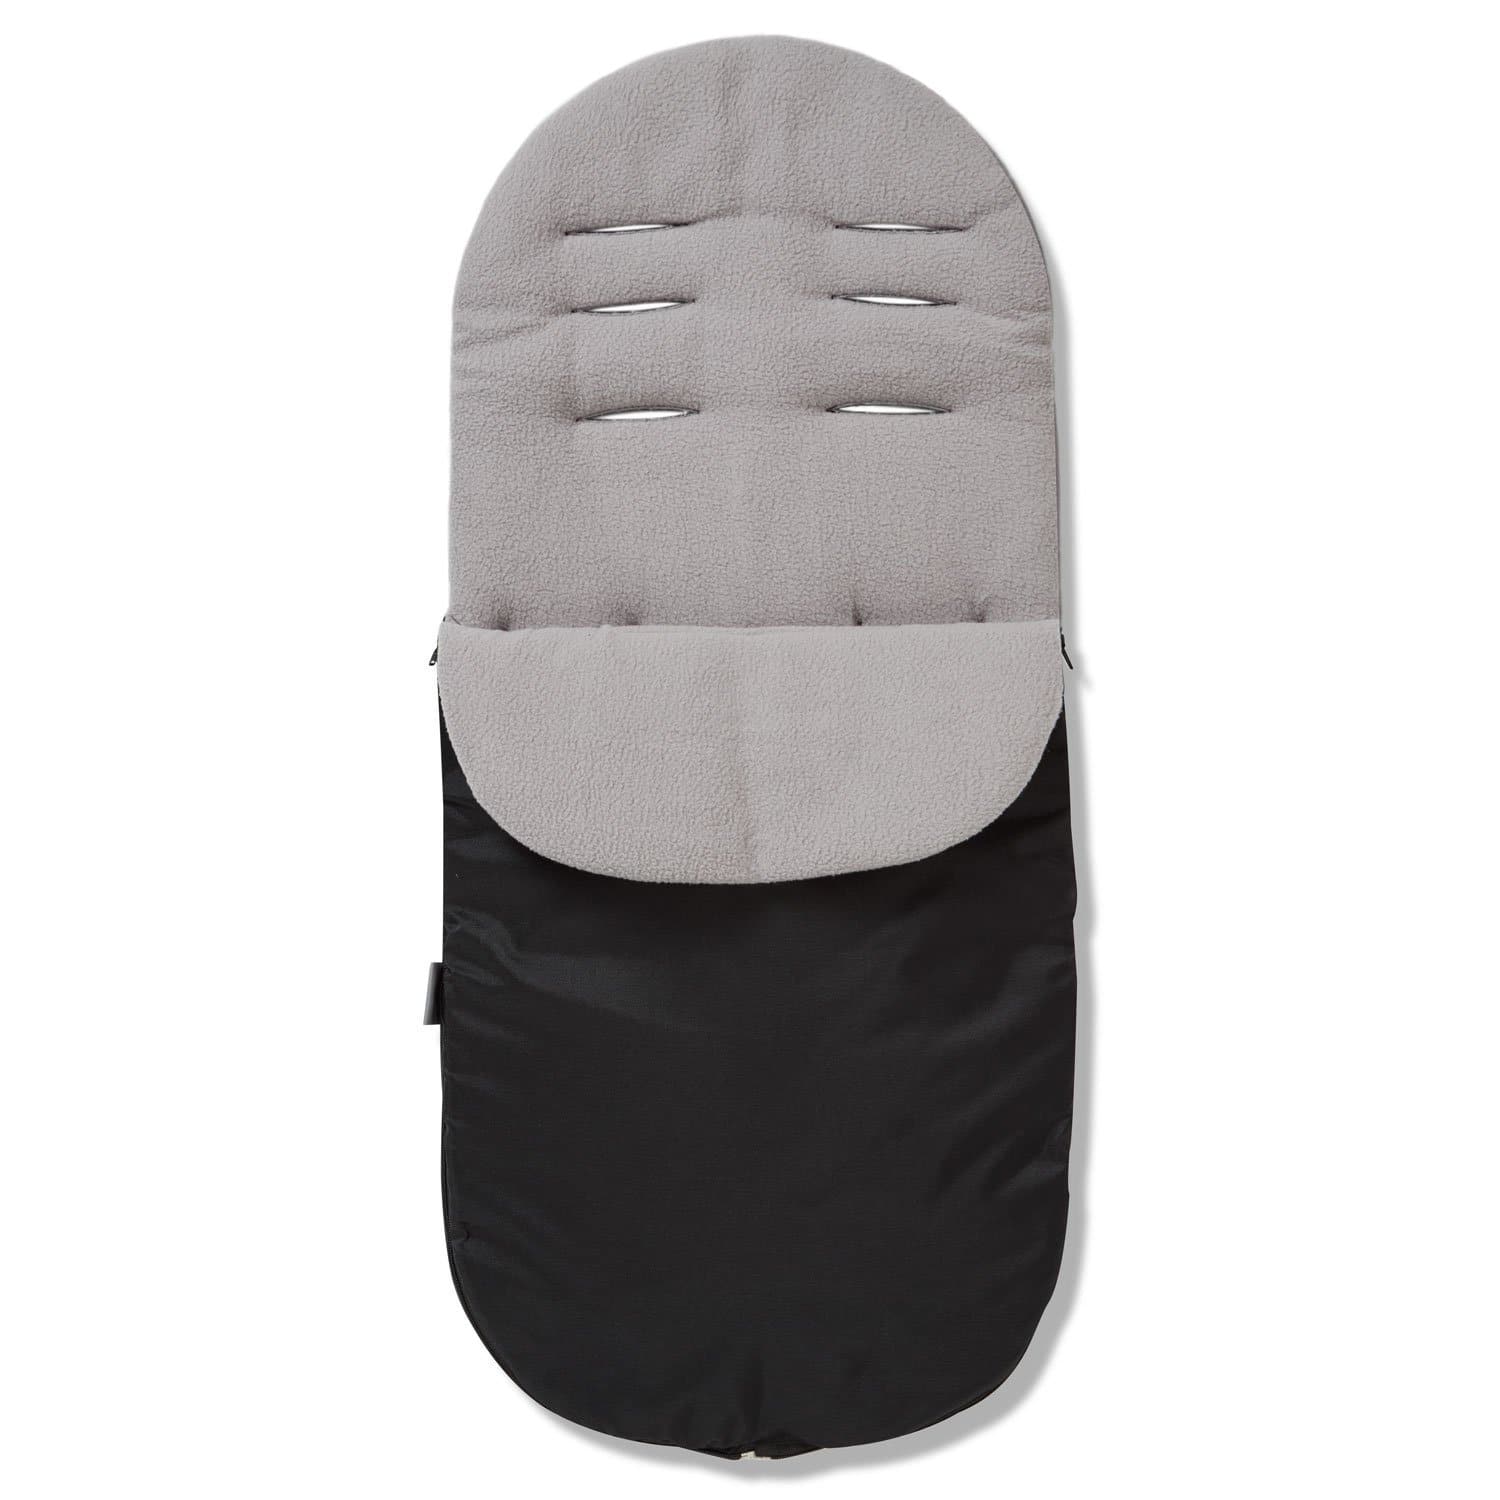 Footmuff / Cosy Toes Compatible with Maclaren - Grey / Fits All Models | For Your Little One